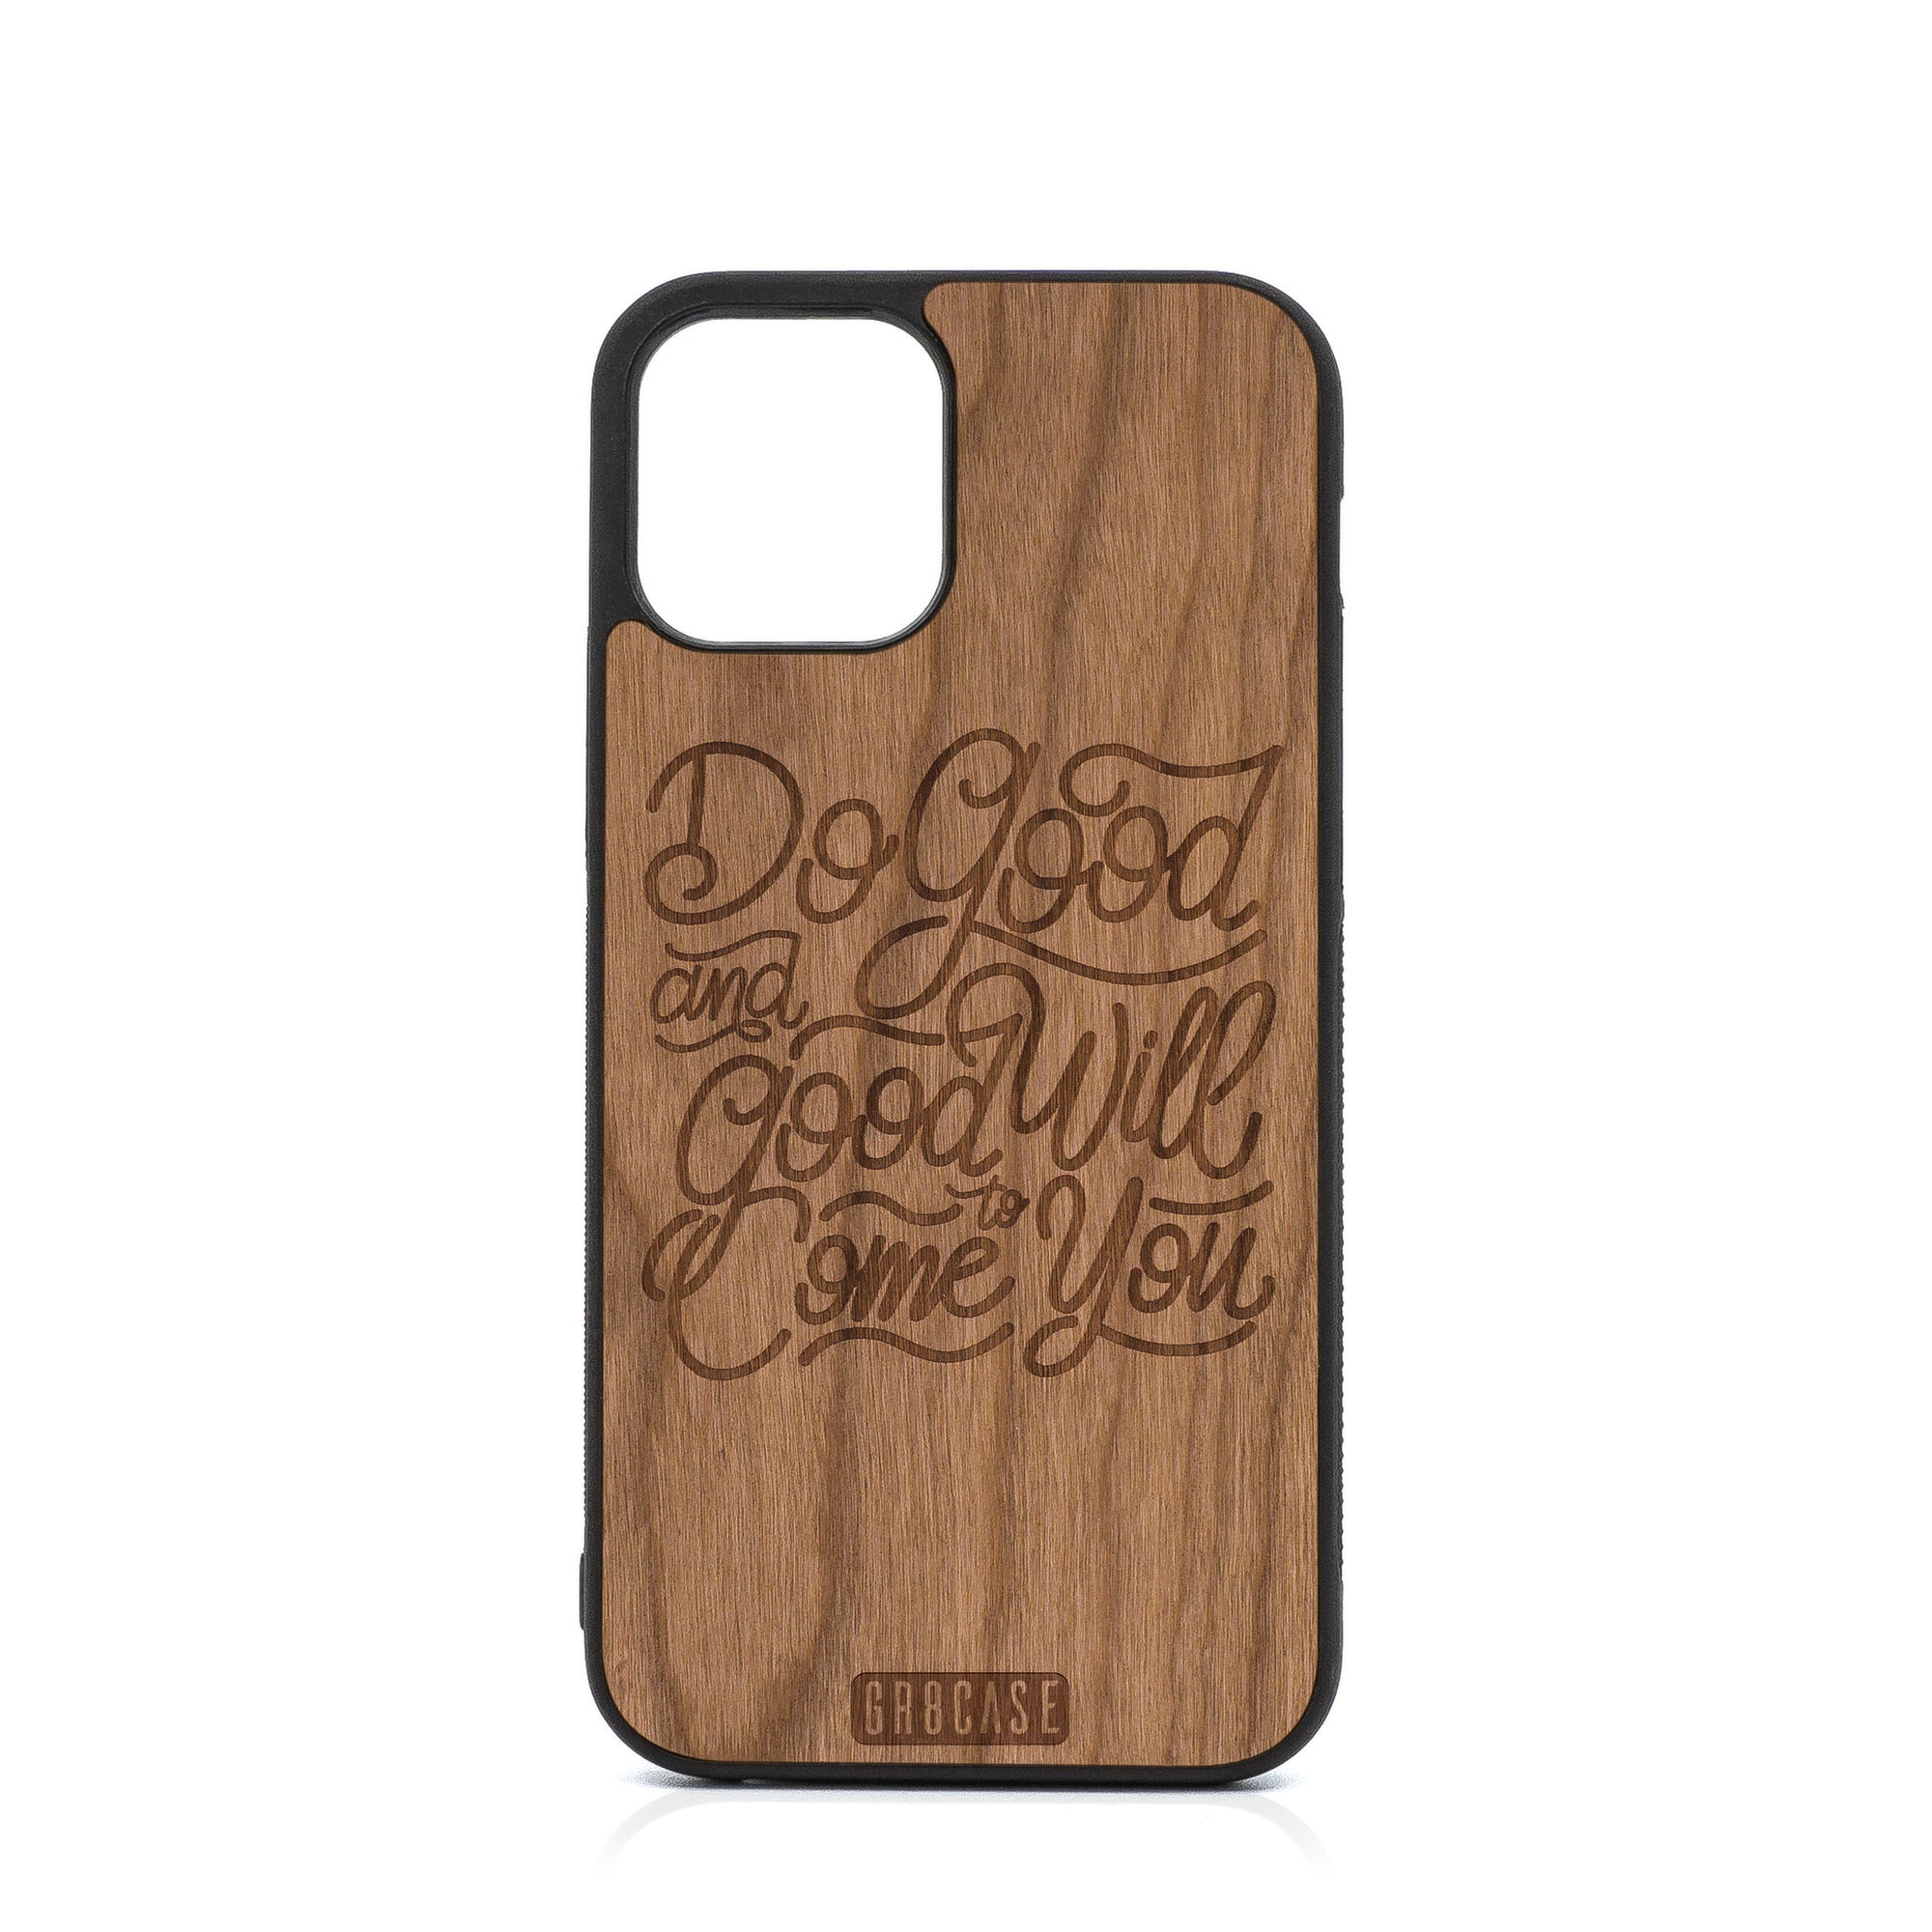 Do Good And Good Will Come To You Design Wood Case For iPhone 12